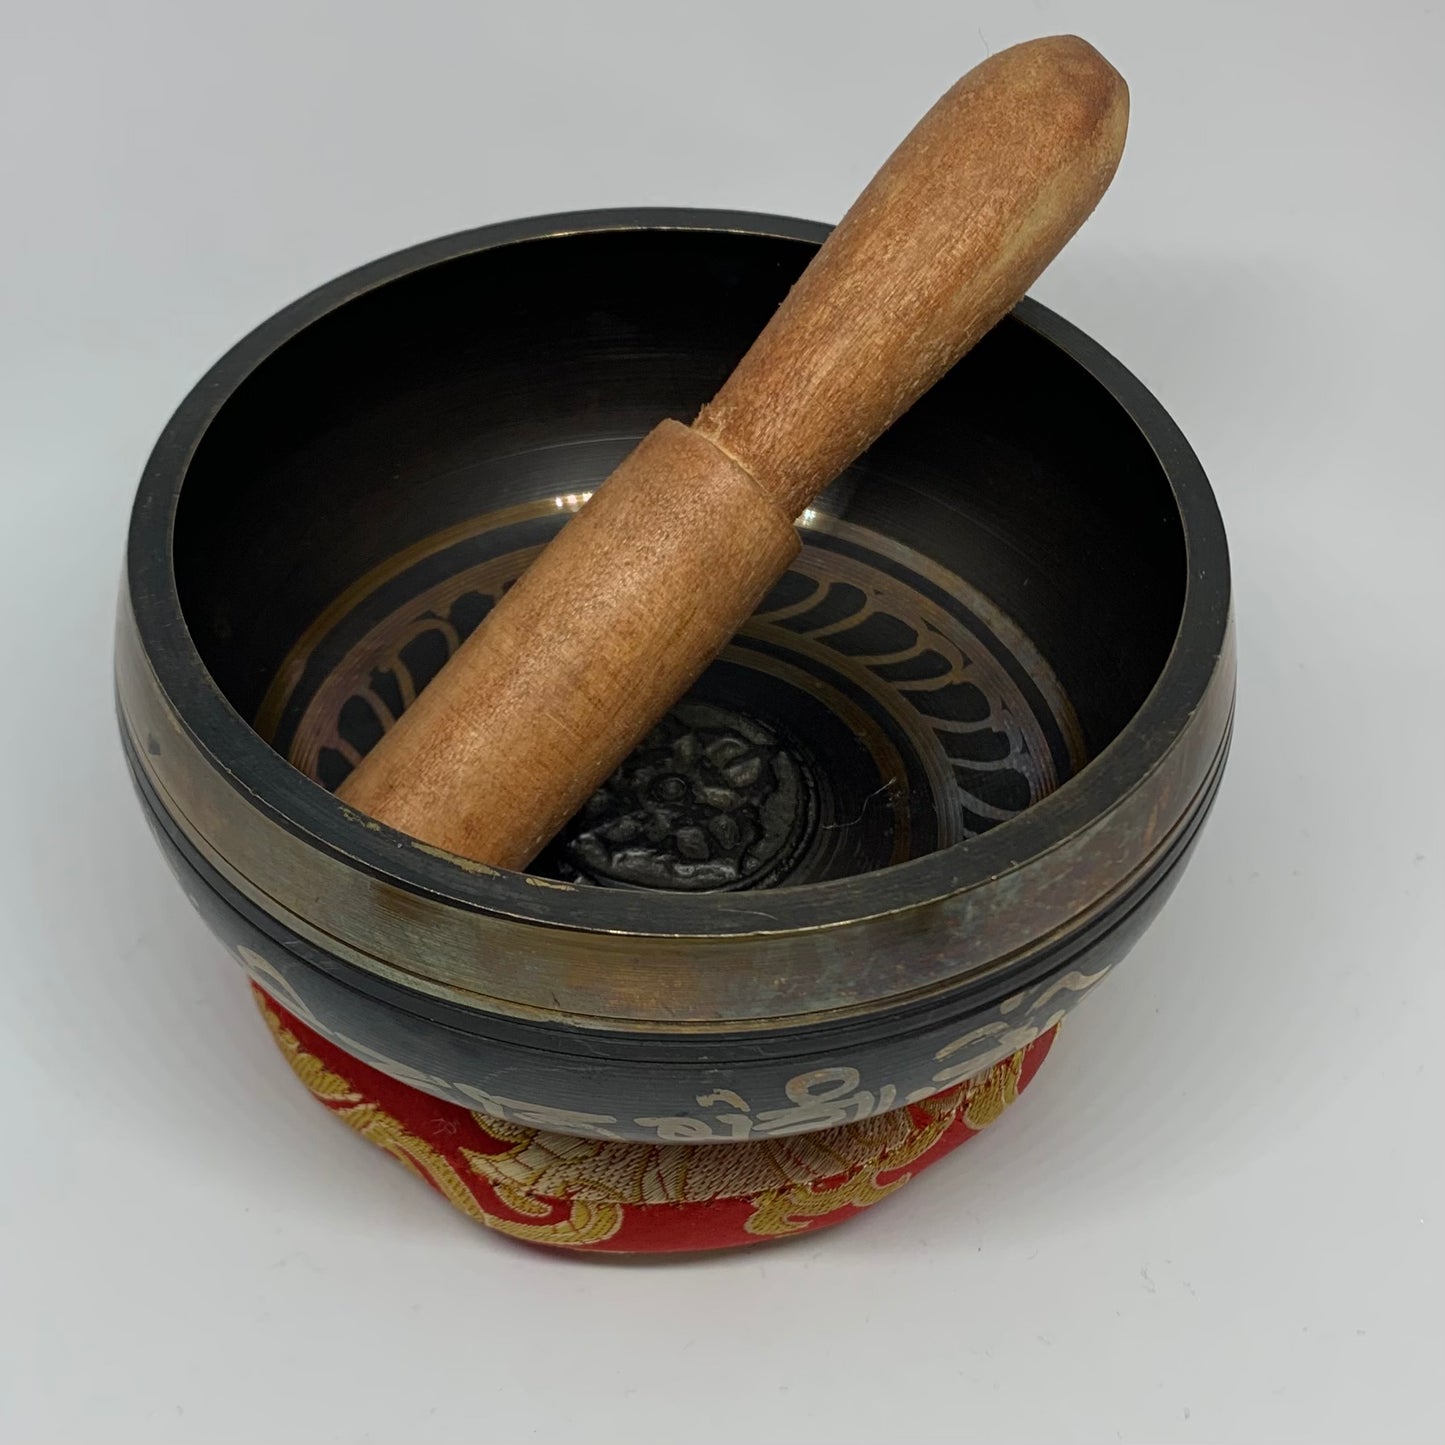 Singing Bowl with striker and cushion